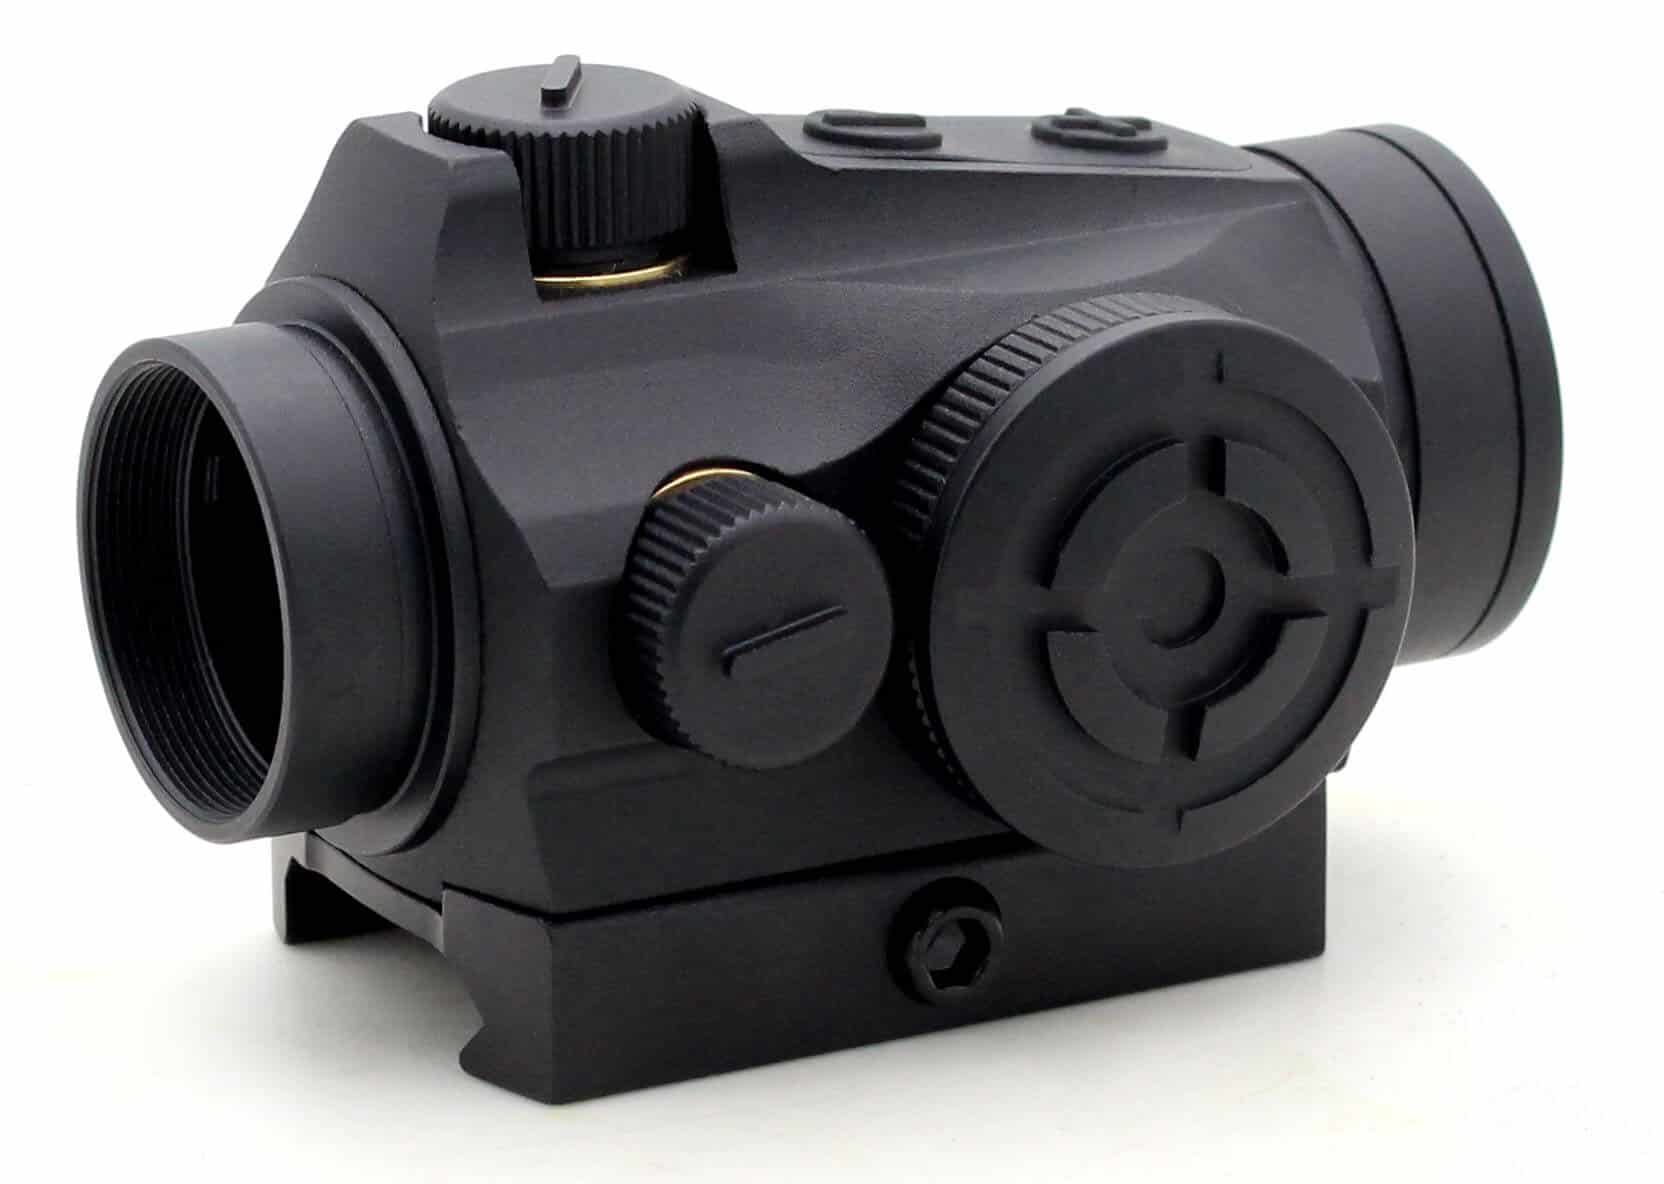 GHT T Series red dot with removable skellington mount